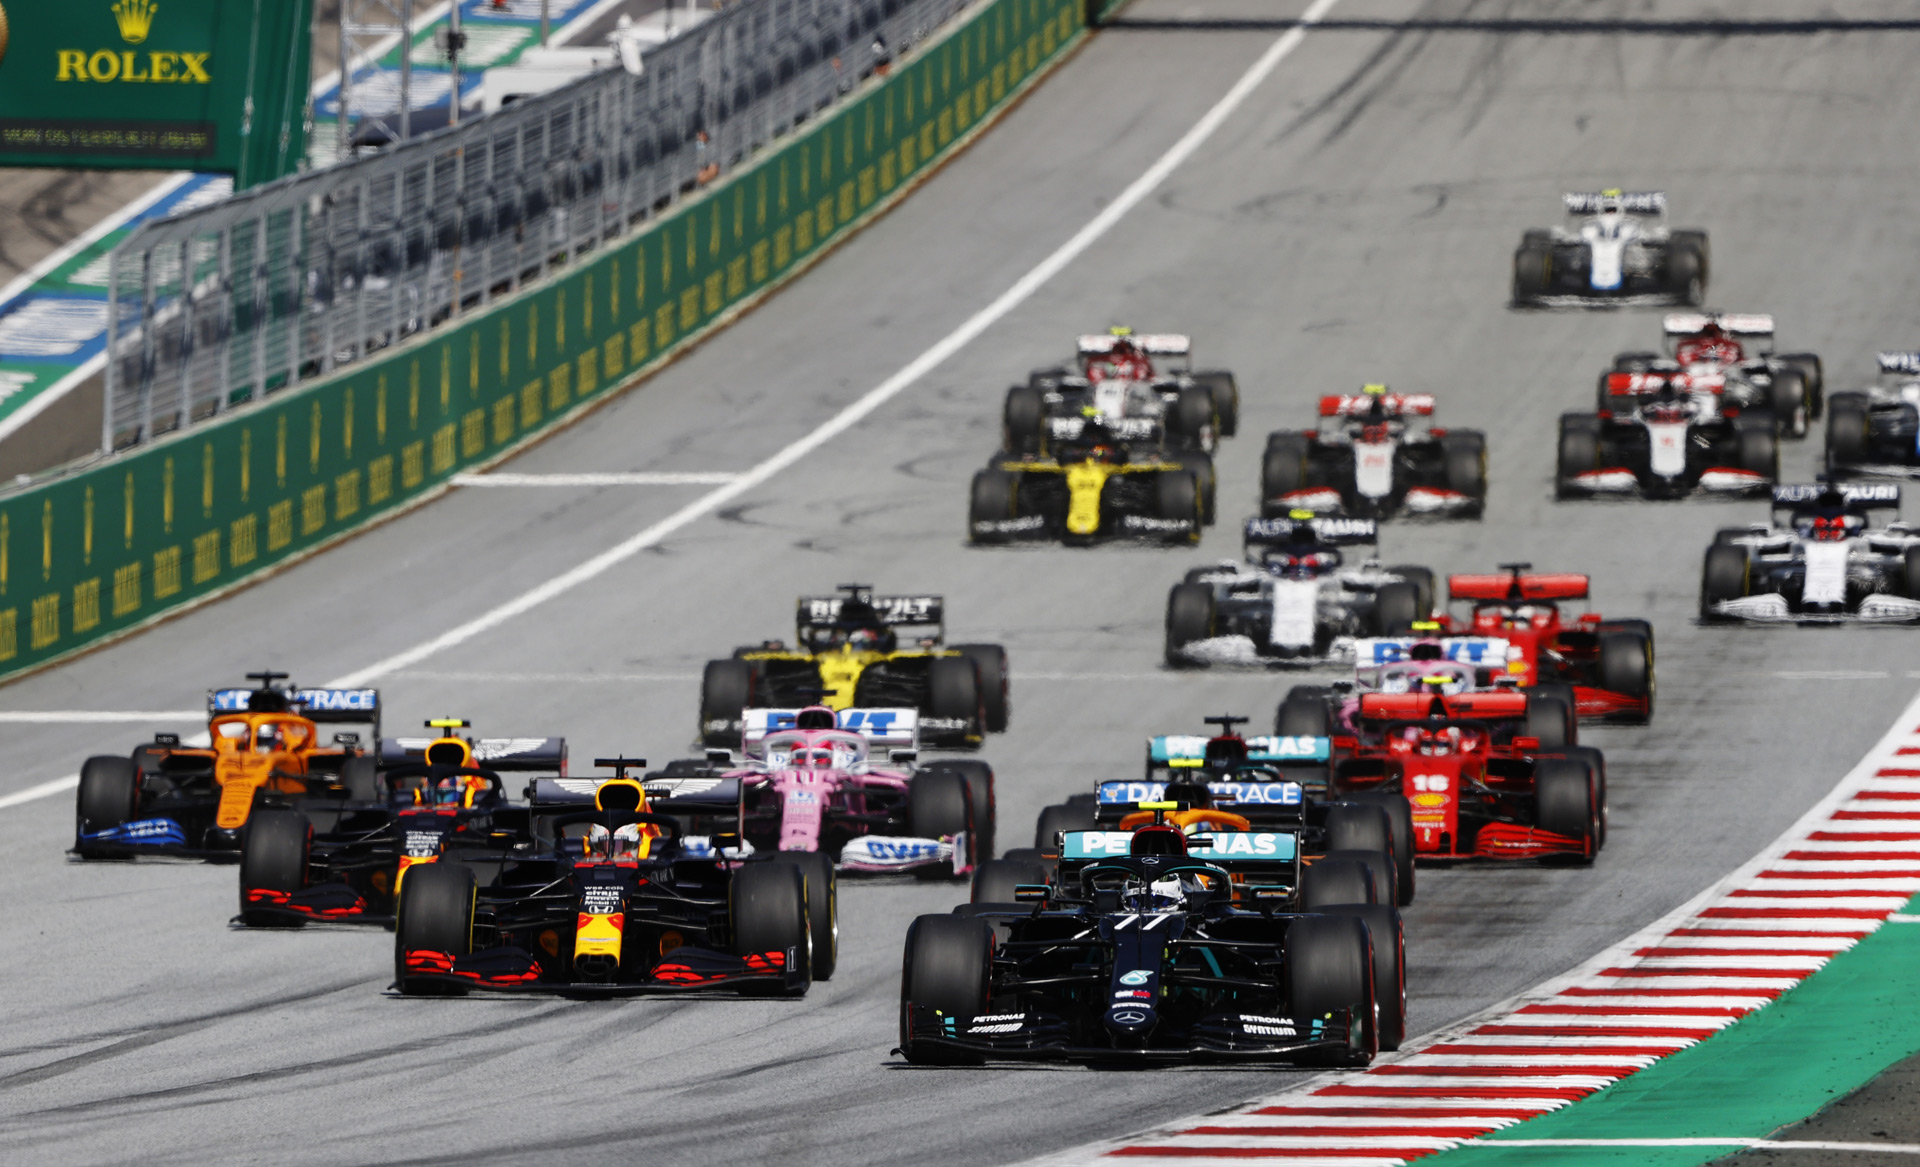 Mercedes' Bottas comes out on top at 2020 Formula One Austrian Grand Prix